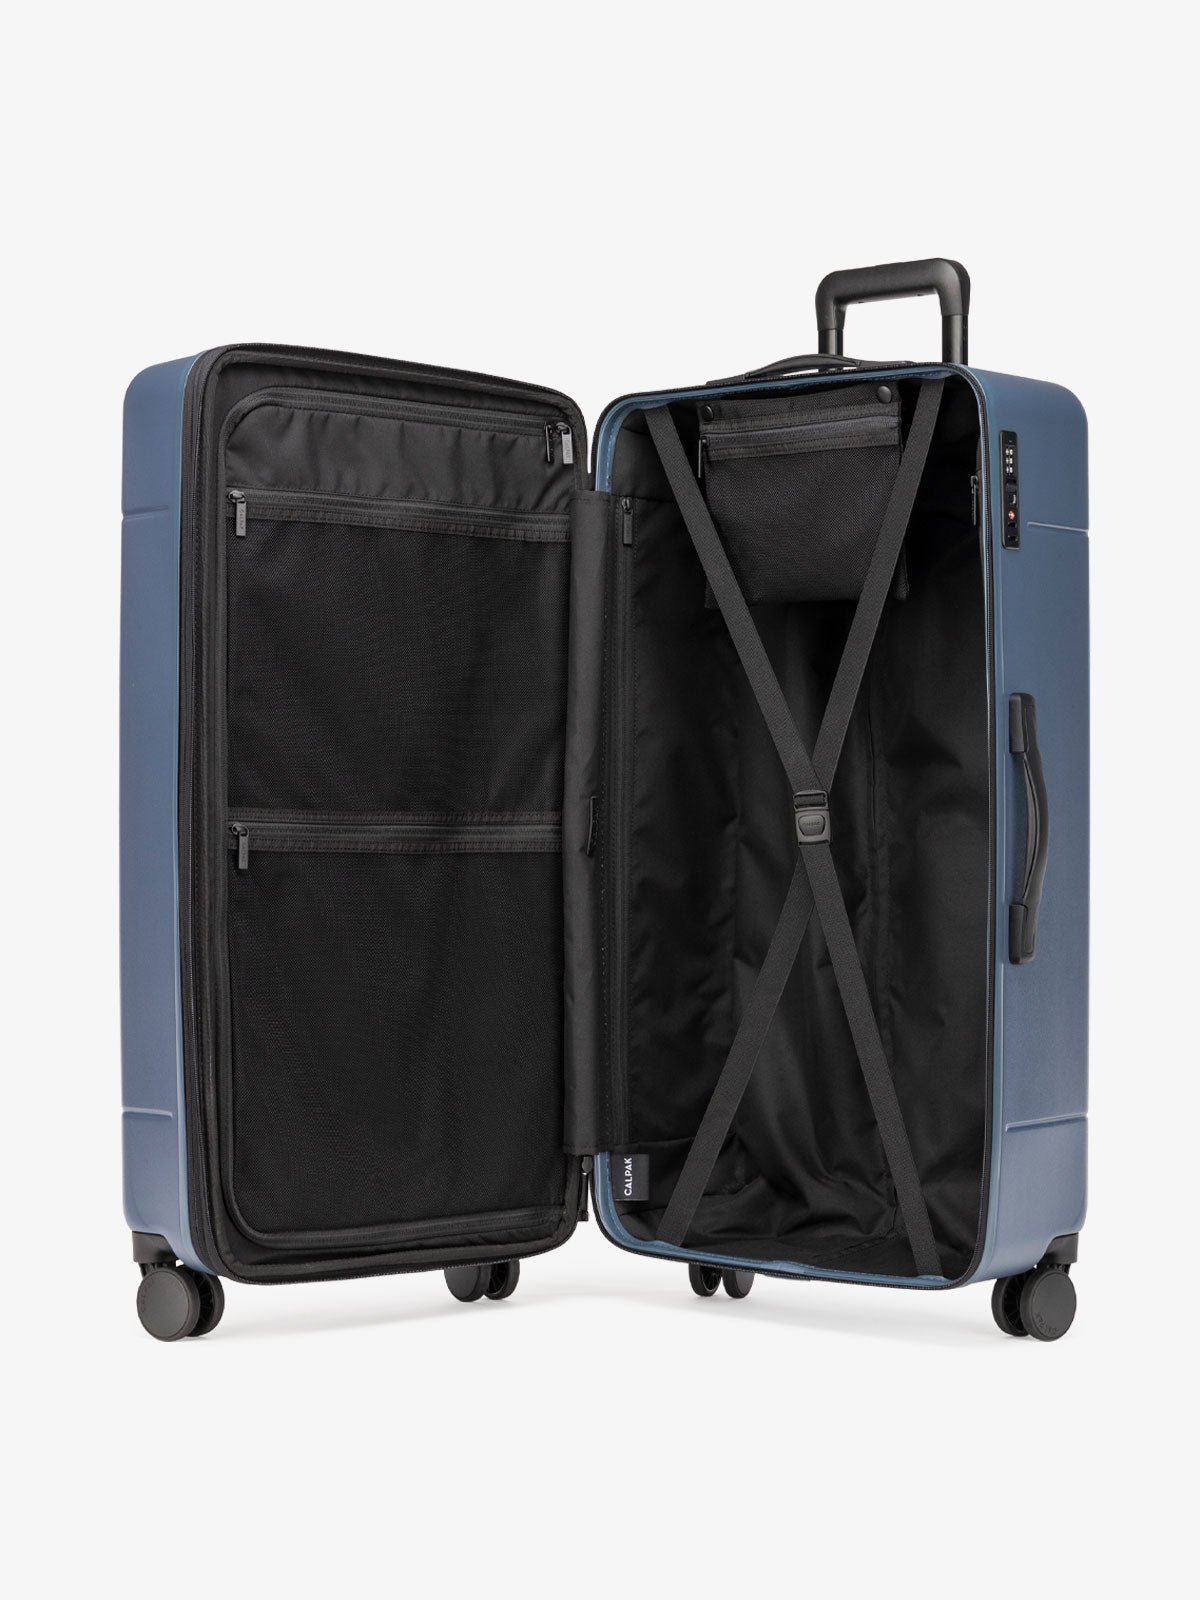 interior of Hue 31 inch hard side polycarbonate trunk luggage in atlantic blue